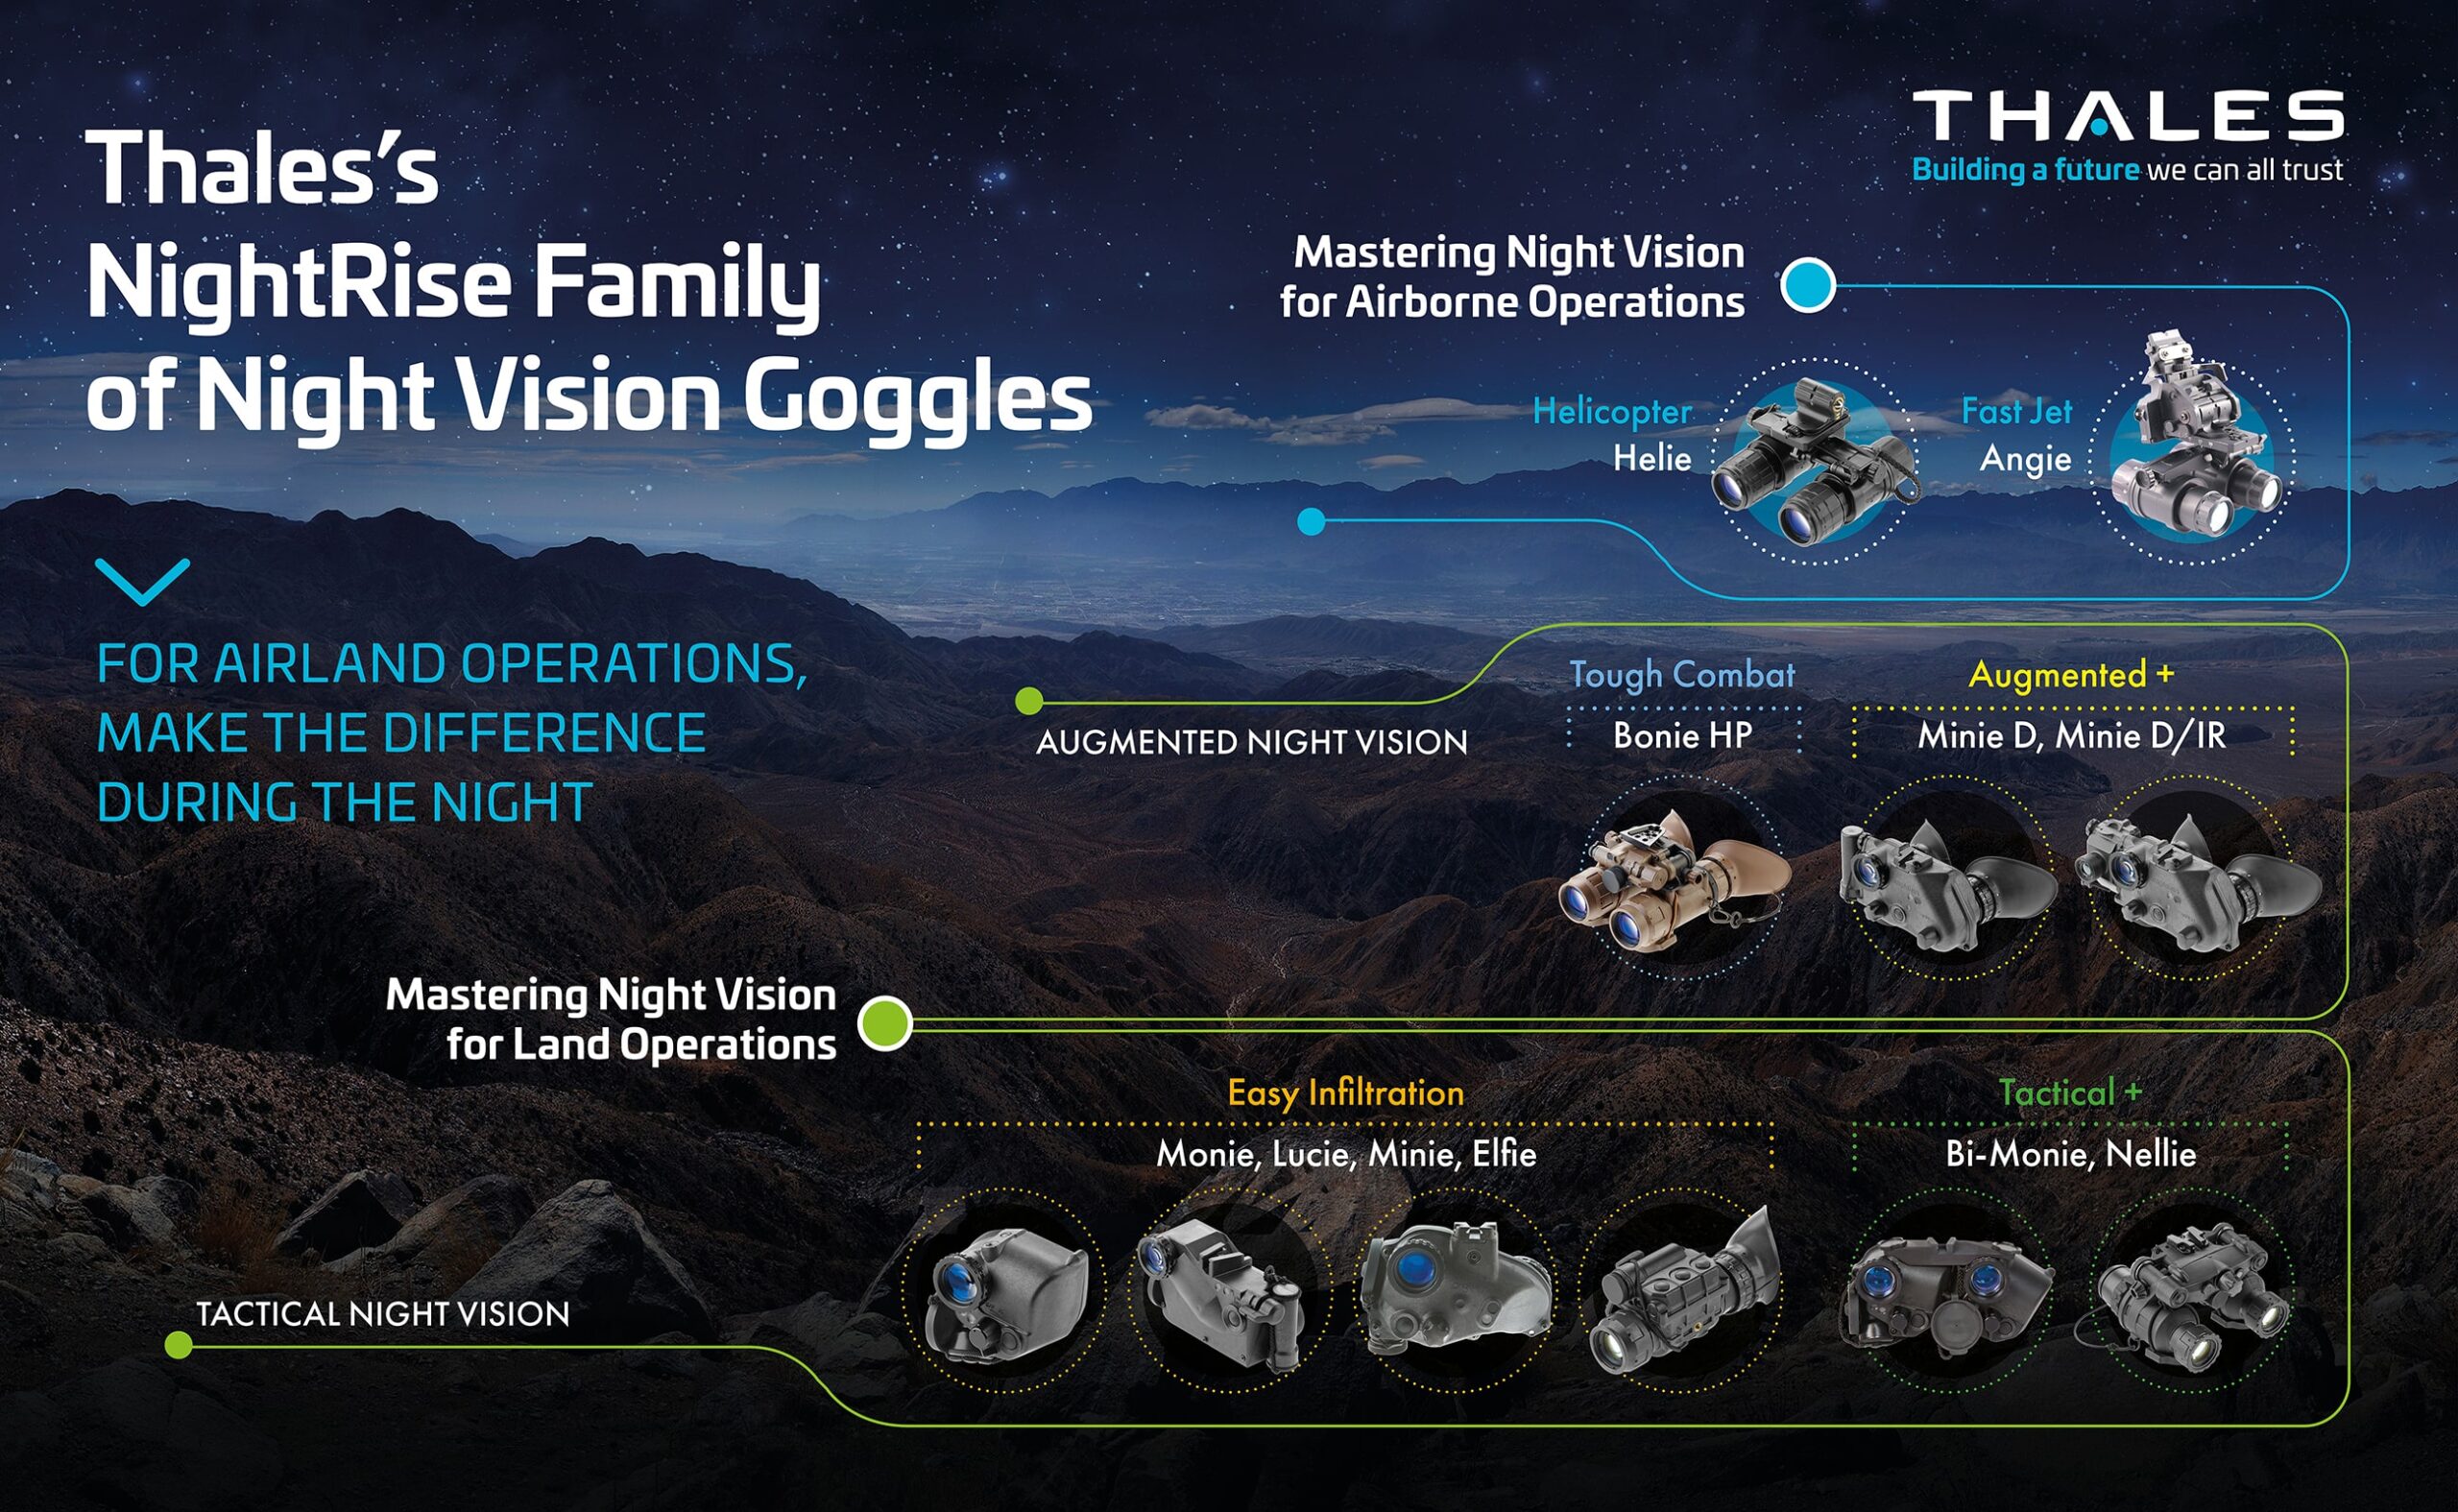 Thales's NightRise Family of Night Vision Goggles